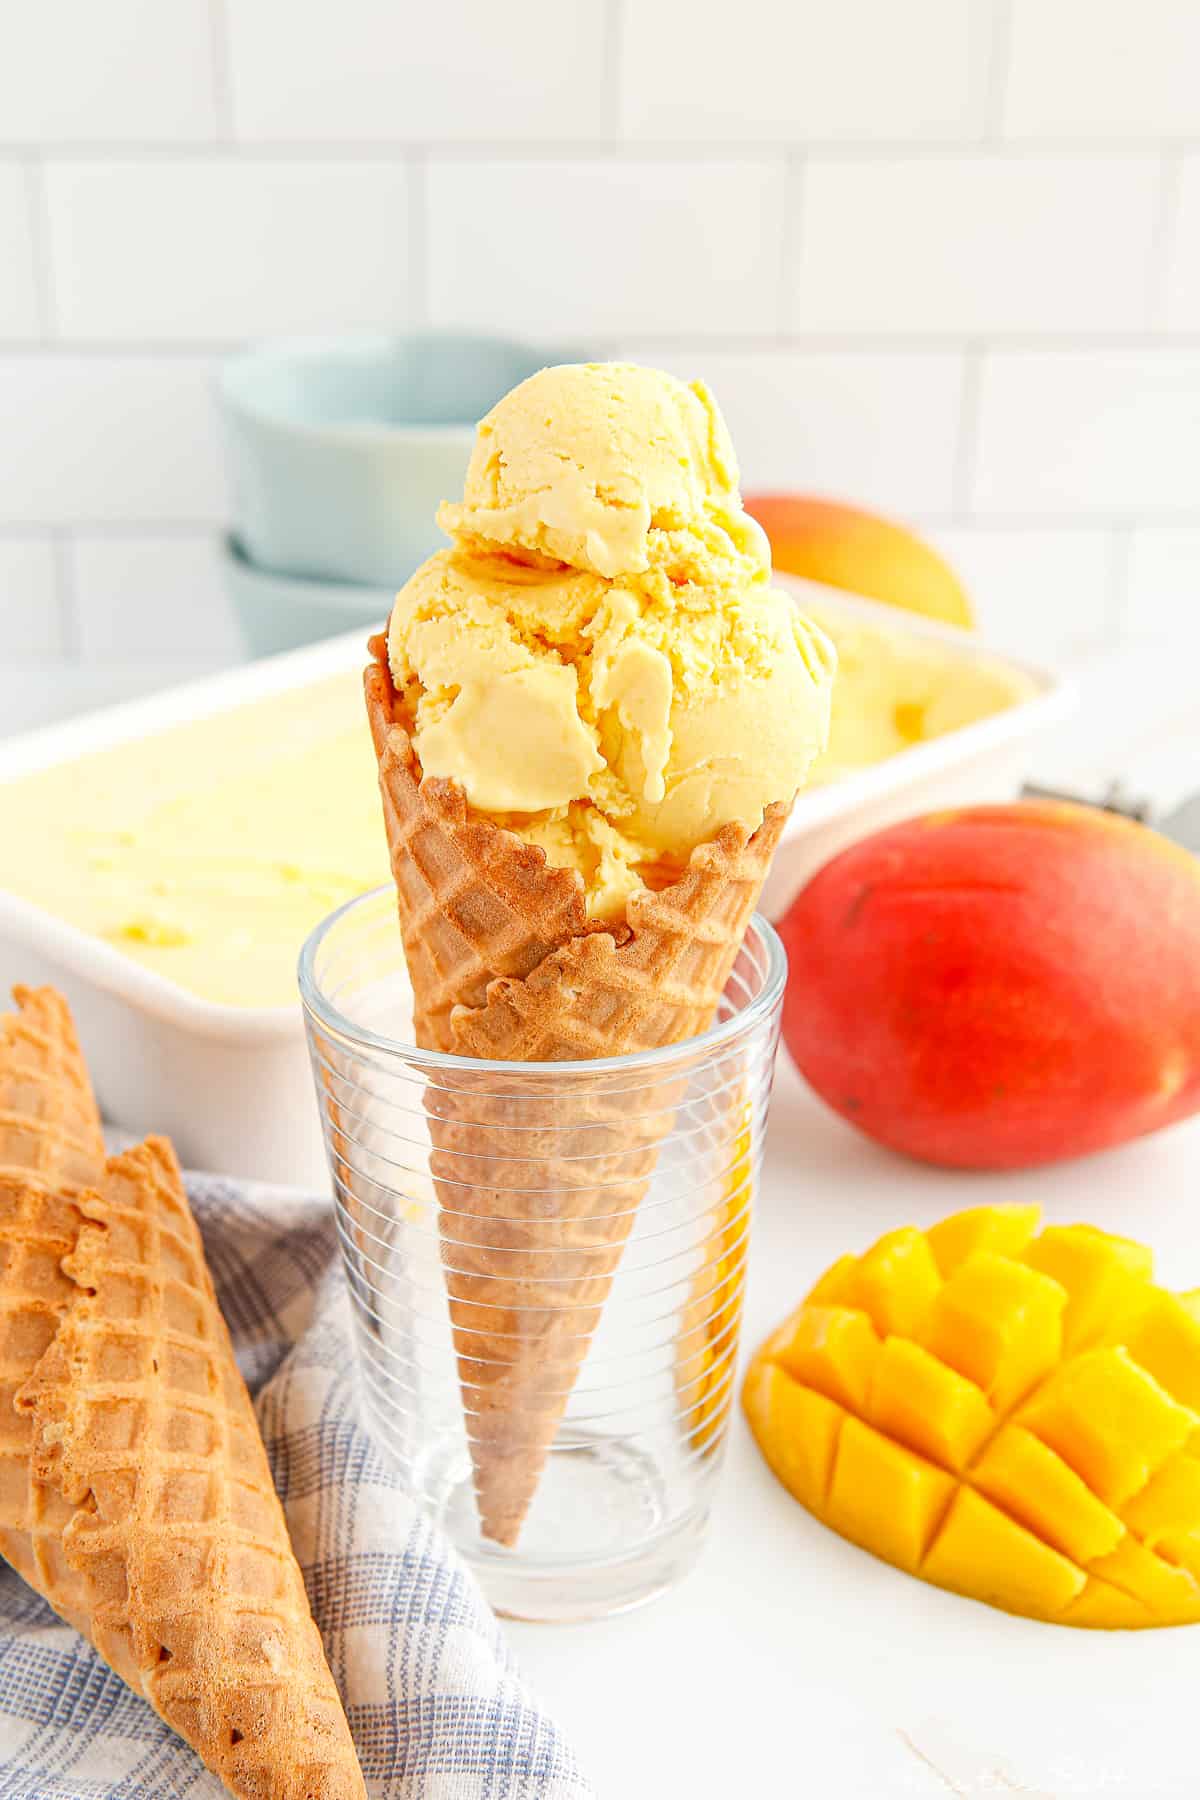 ice cream cone sitting in a glass and filled with a large scoop of mango ice cream